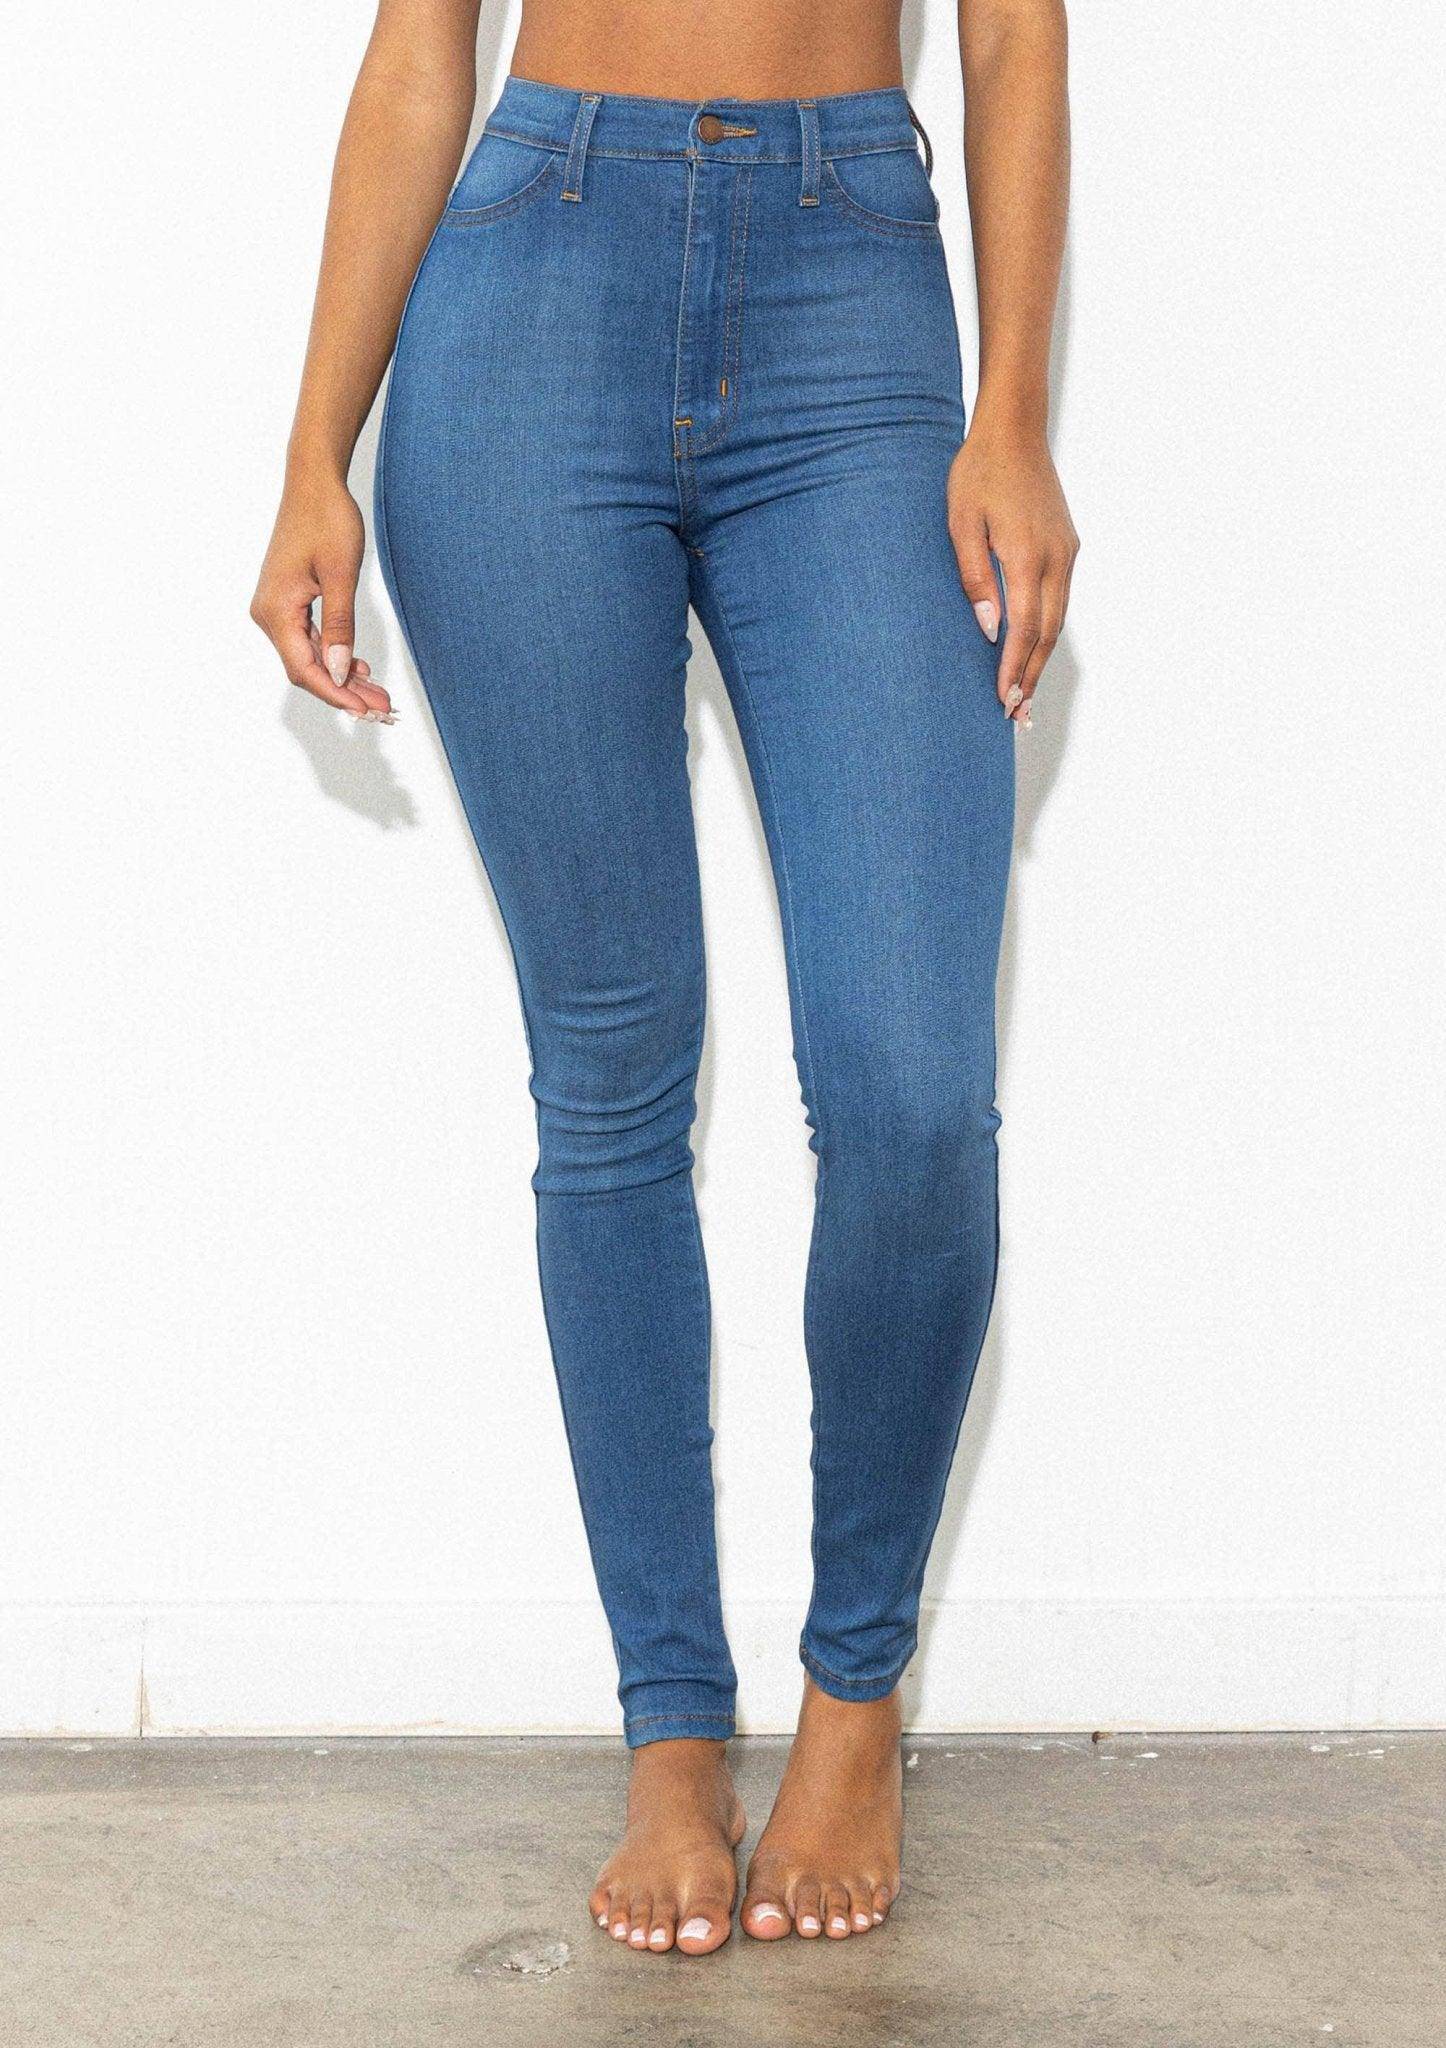 Vibrant Skinny Jeans, [product type]